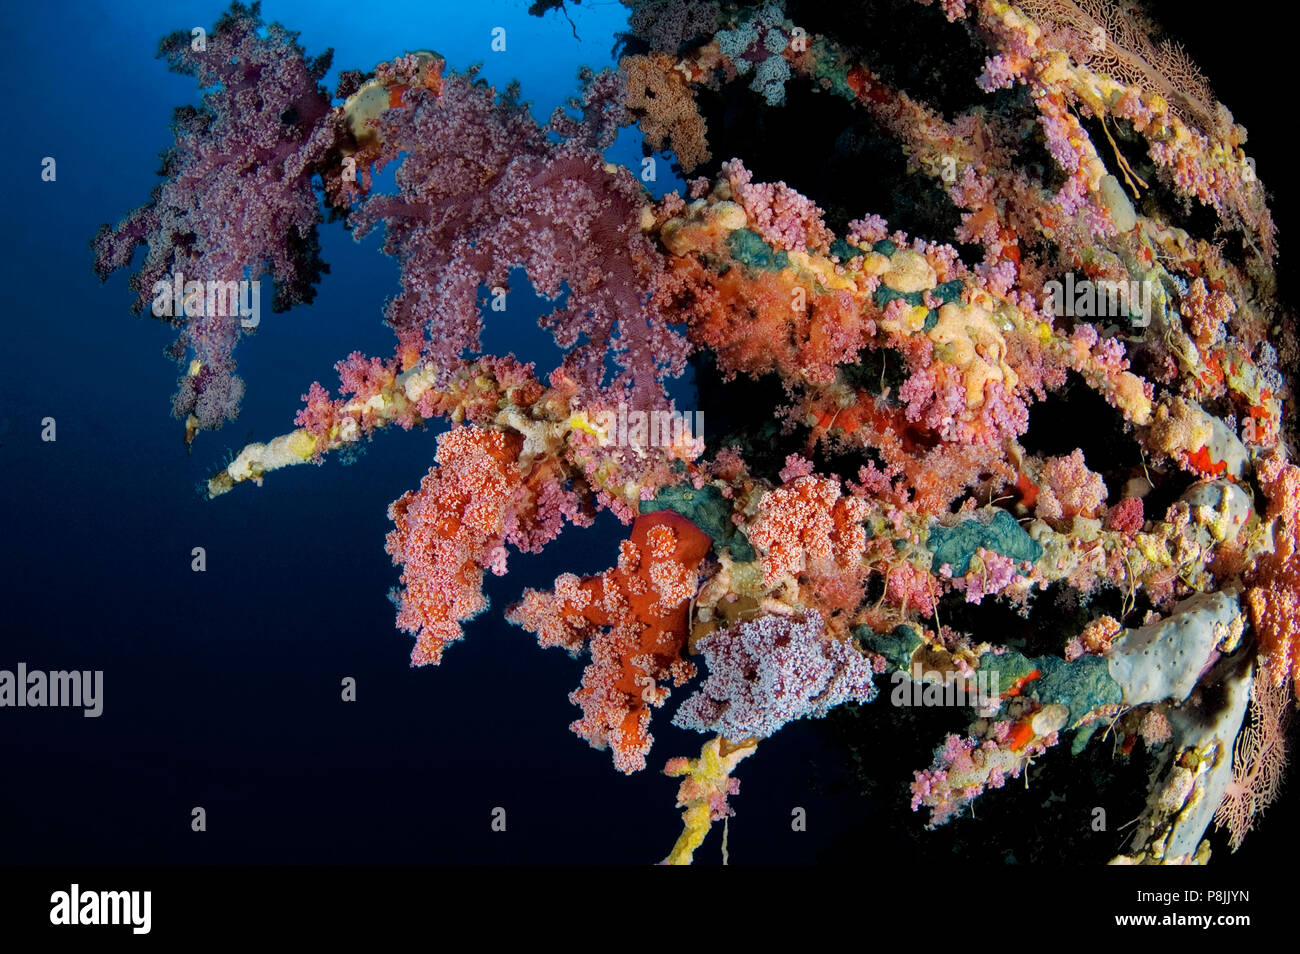 Soft corals on Daedalus Reef Stock Photo